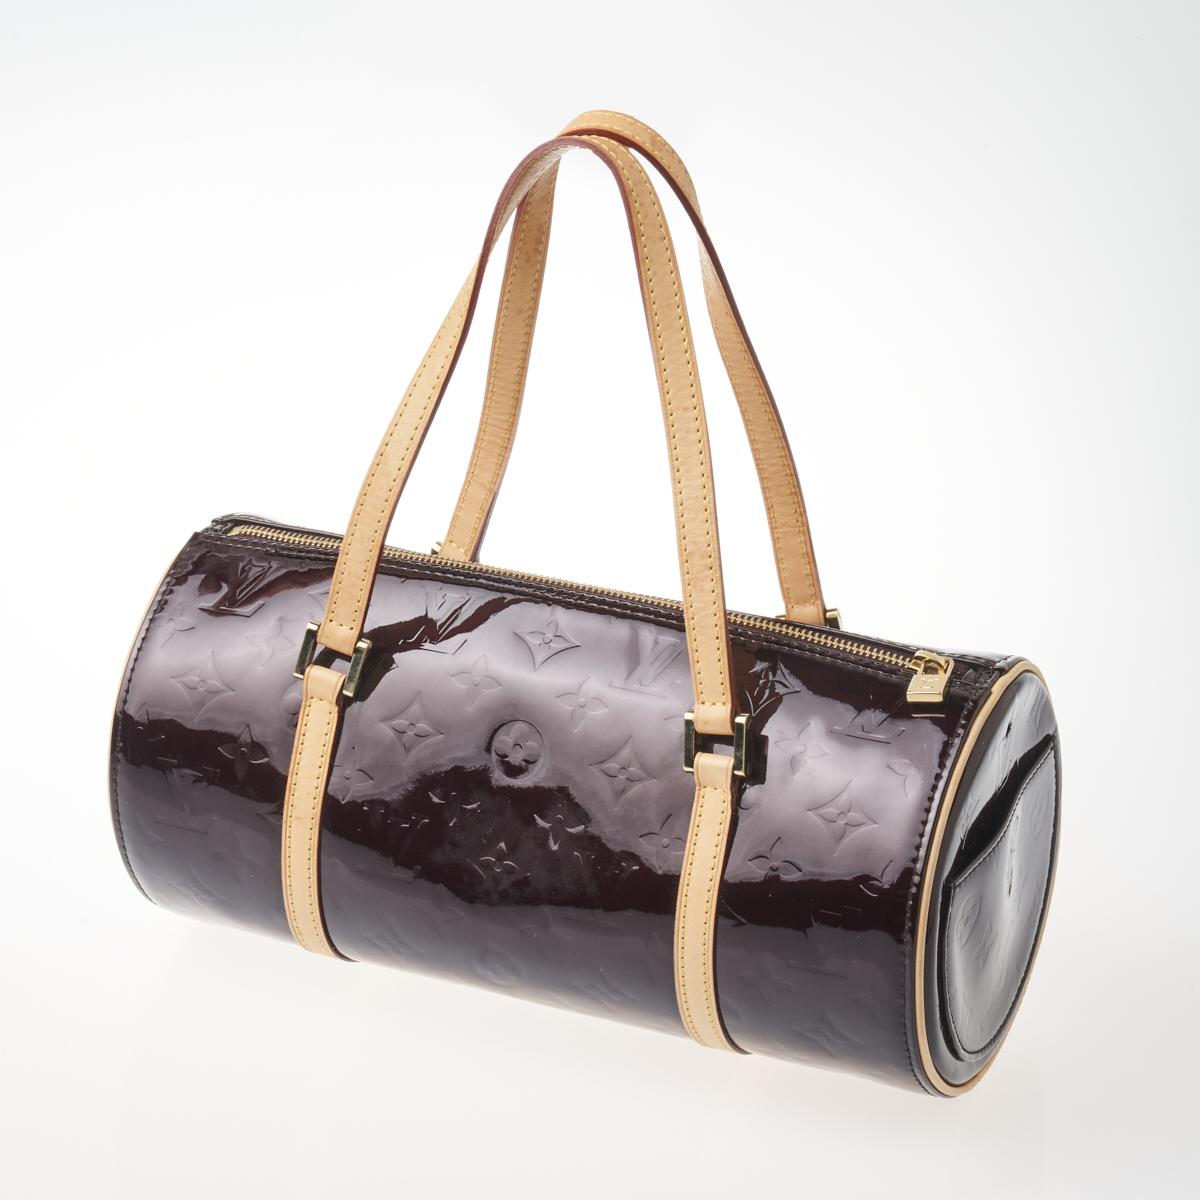 Sold at Auction: Cylindrical Top Handle Bag, Bedford, Louis Vuitton